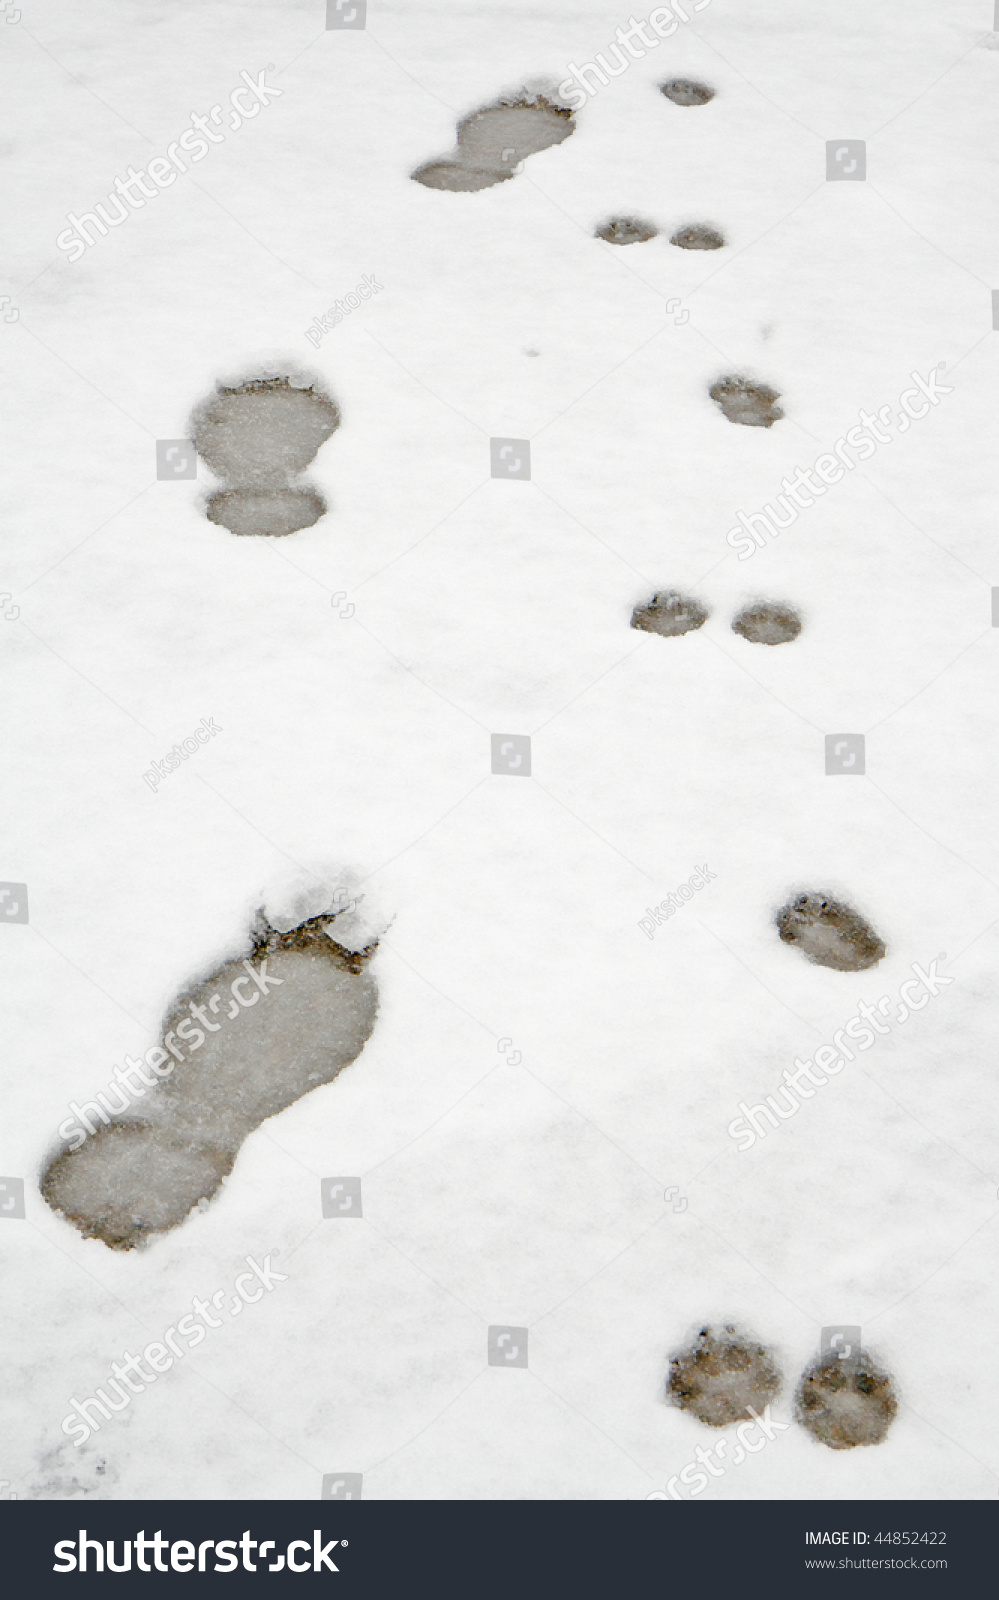 Human And Dog Footprints In Snow Stock Photo 44852422 : Shutterstock